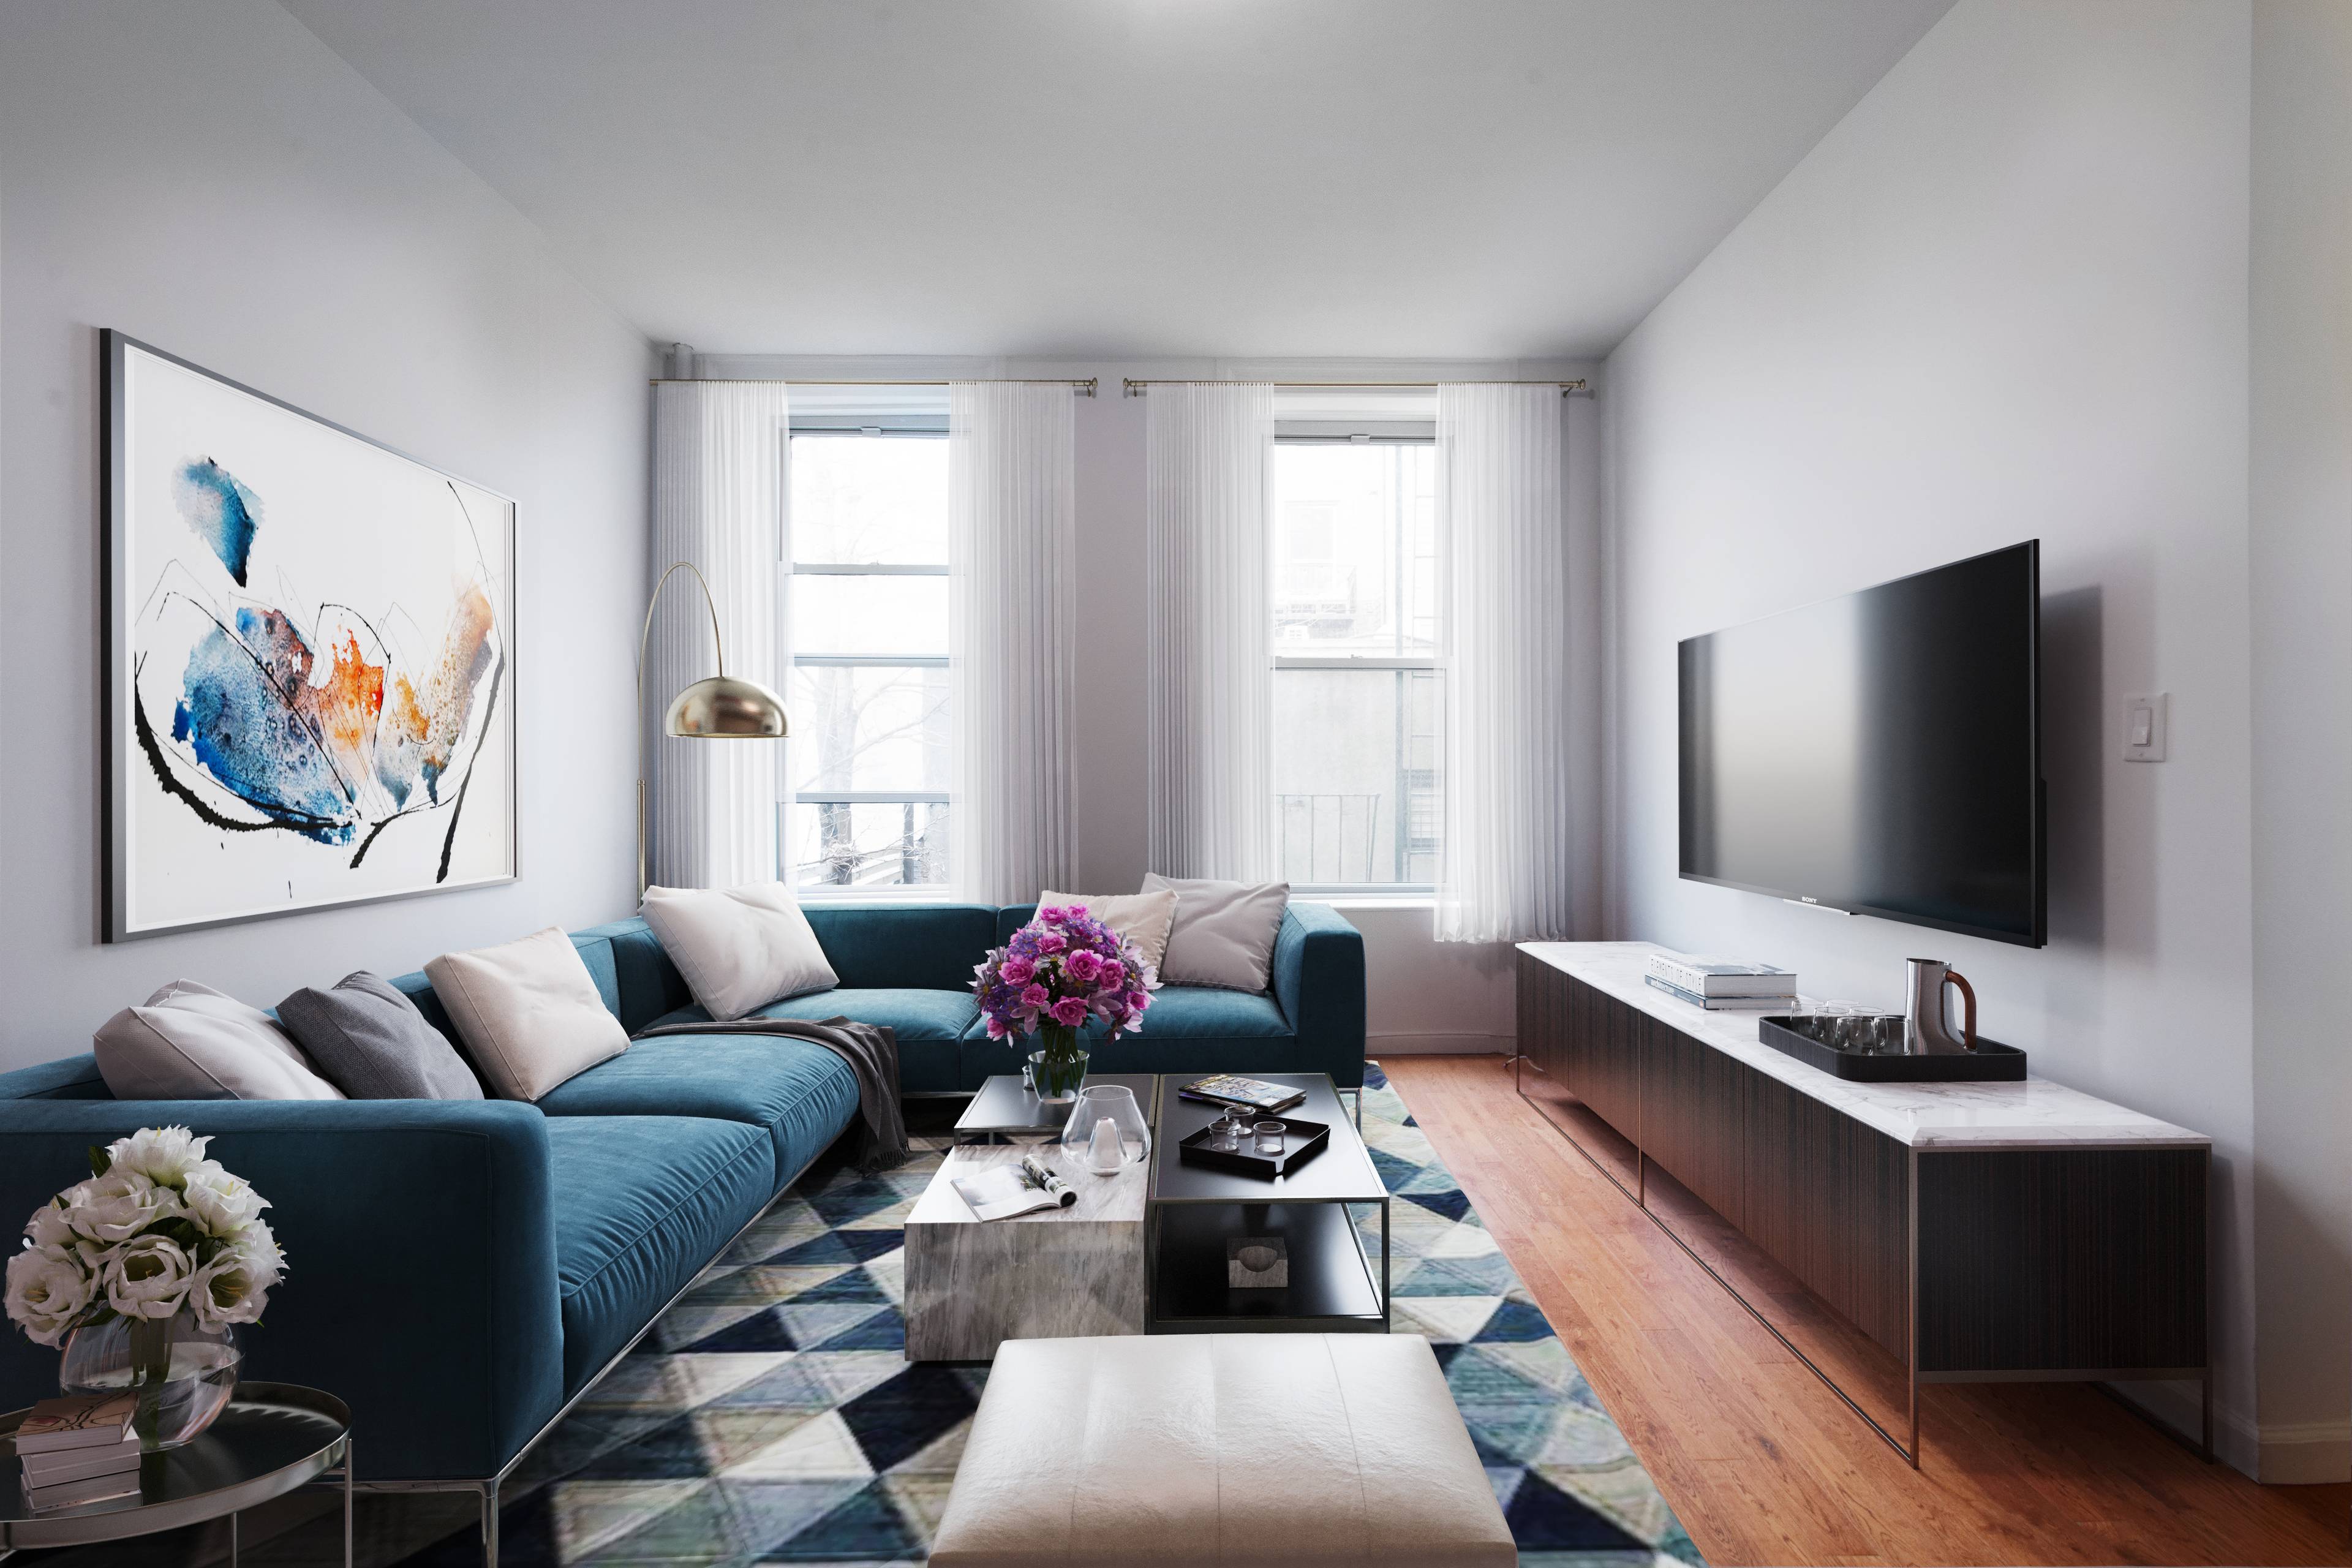 This charming 2 bed 1 bath is located in the coveted neighborhood of Nolita and features a large eat in kitchen, spacious living room, high ceilings, and hardwood floors.